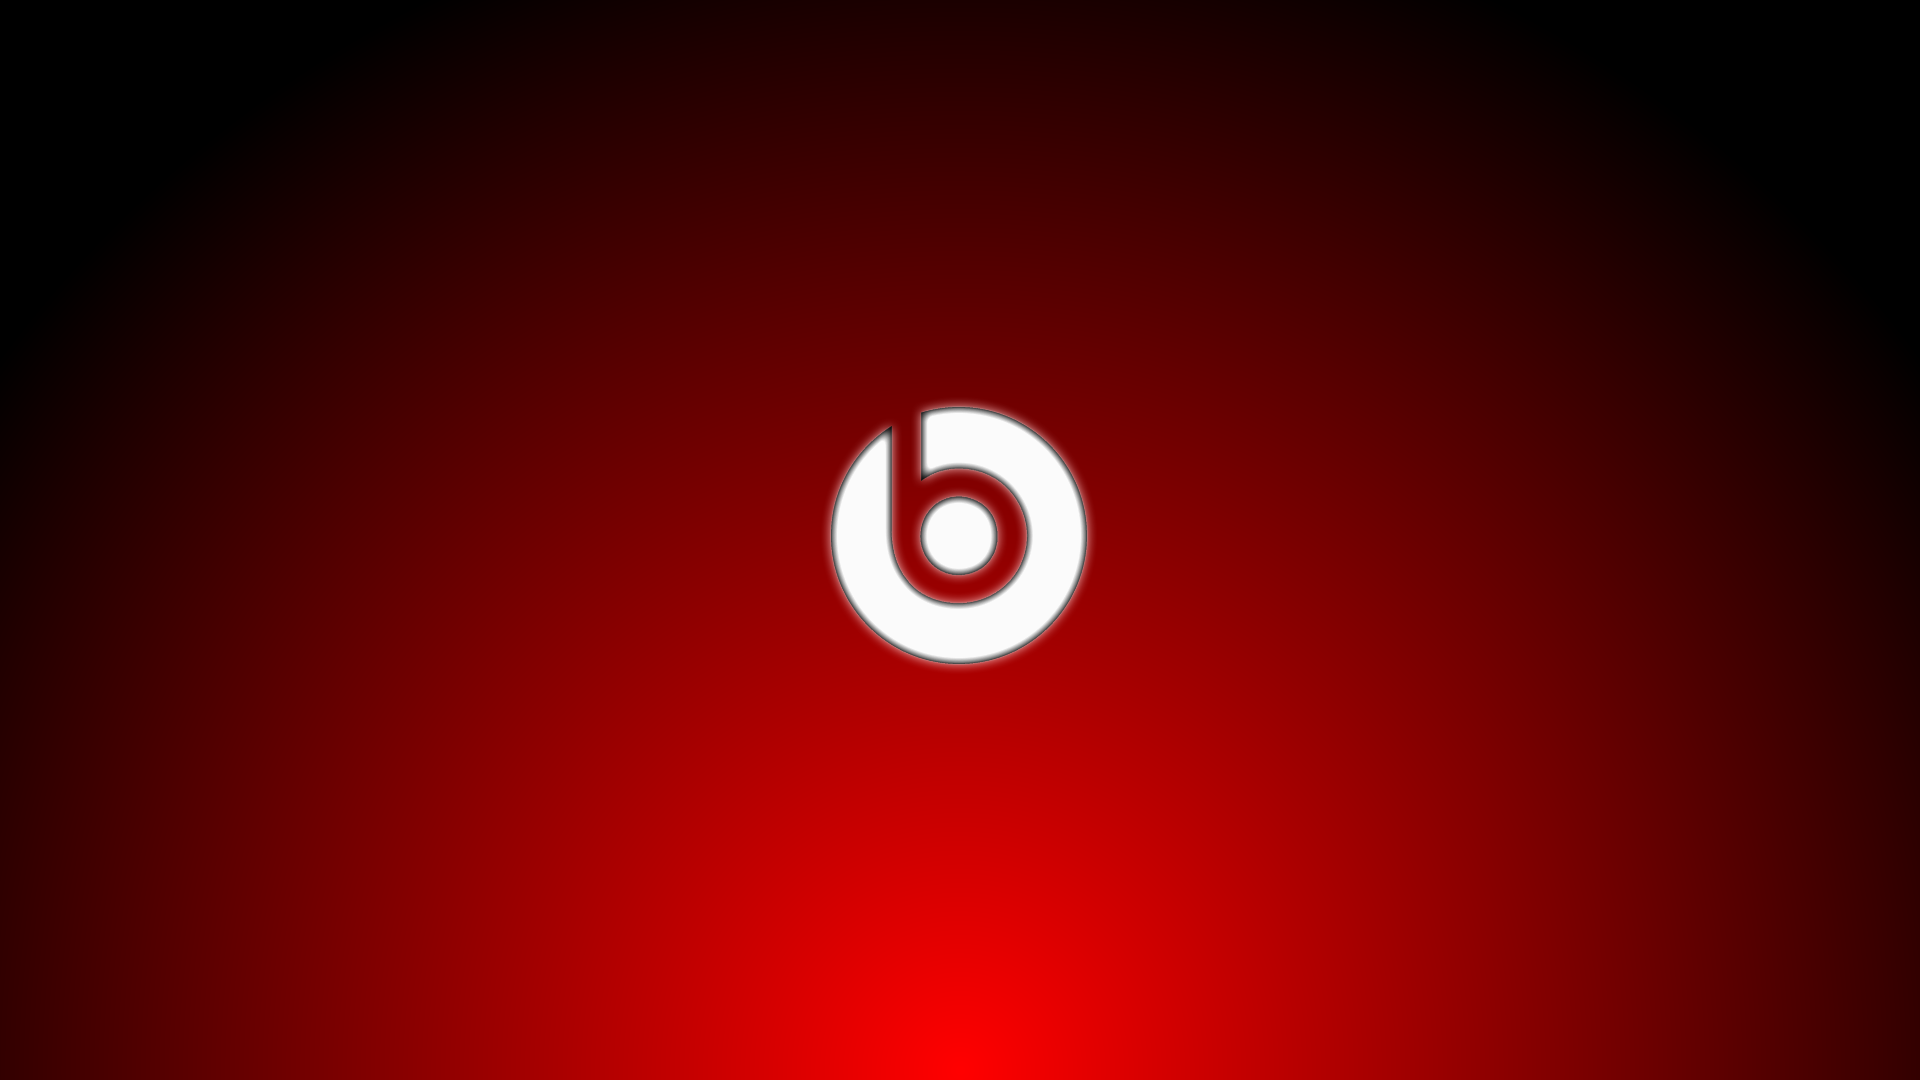 Beats By Dre Wallpapers - Wallpaper Cave